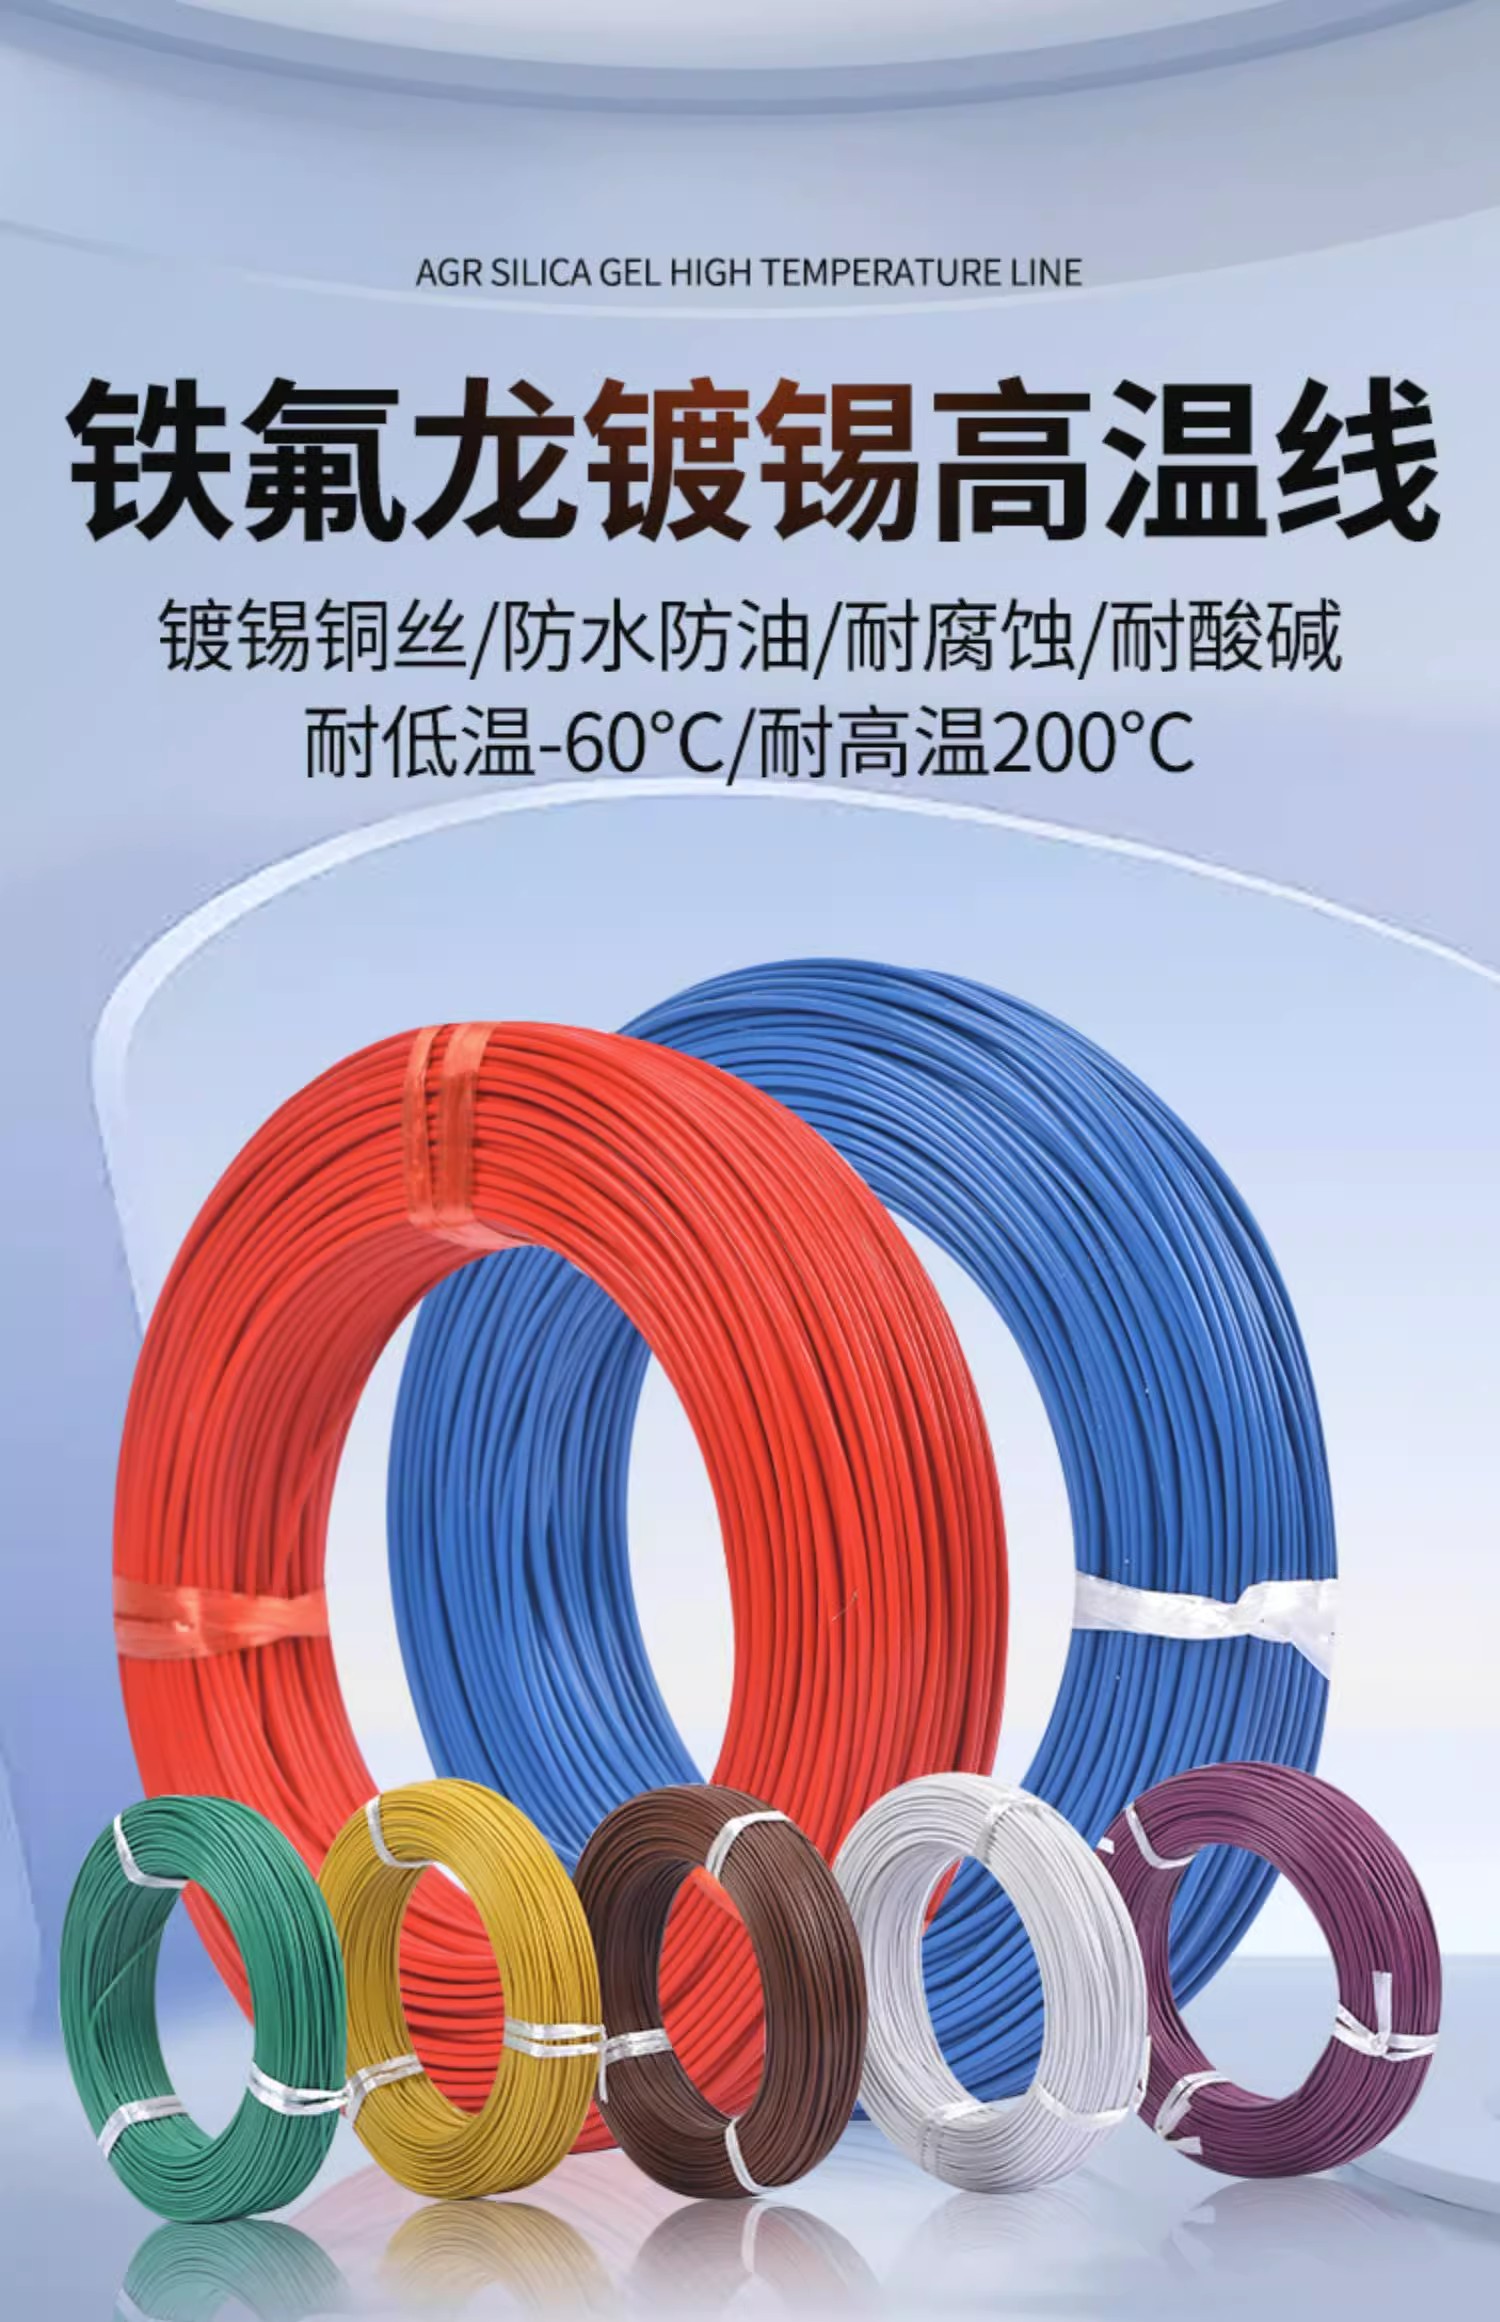 FF46-1 Fluoroplastic High Temperature Wire Electrical Vehicle Connection Wire Tin plated Copper Core Teflon Electronic Wire Ground Sensing Wire